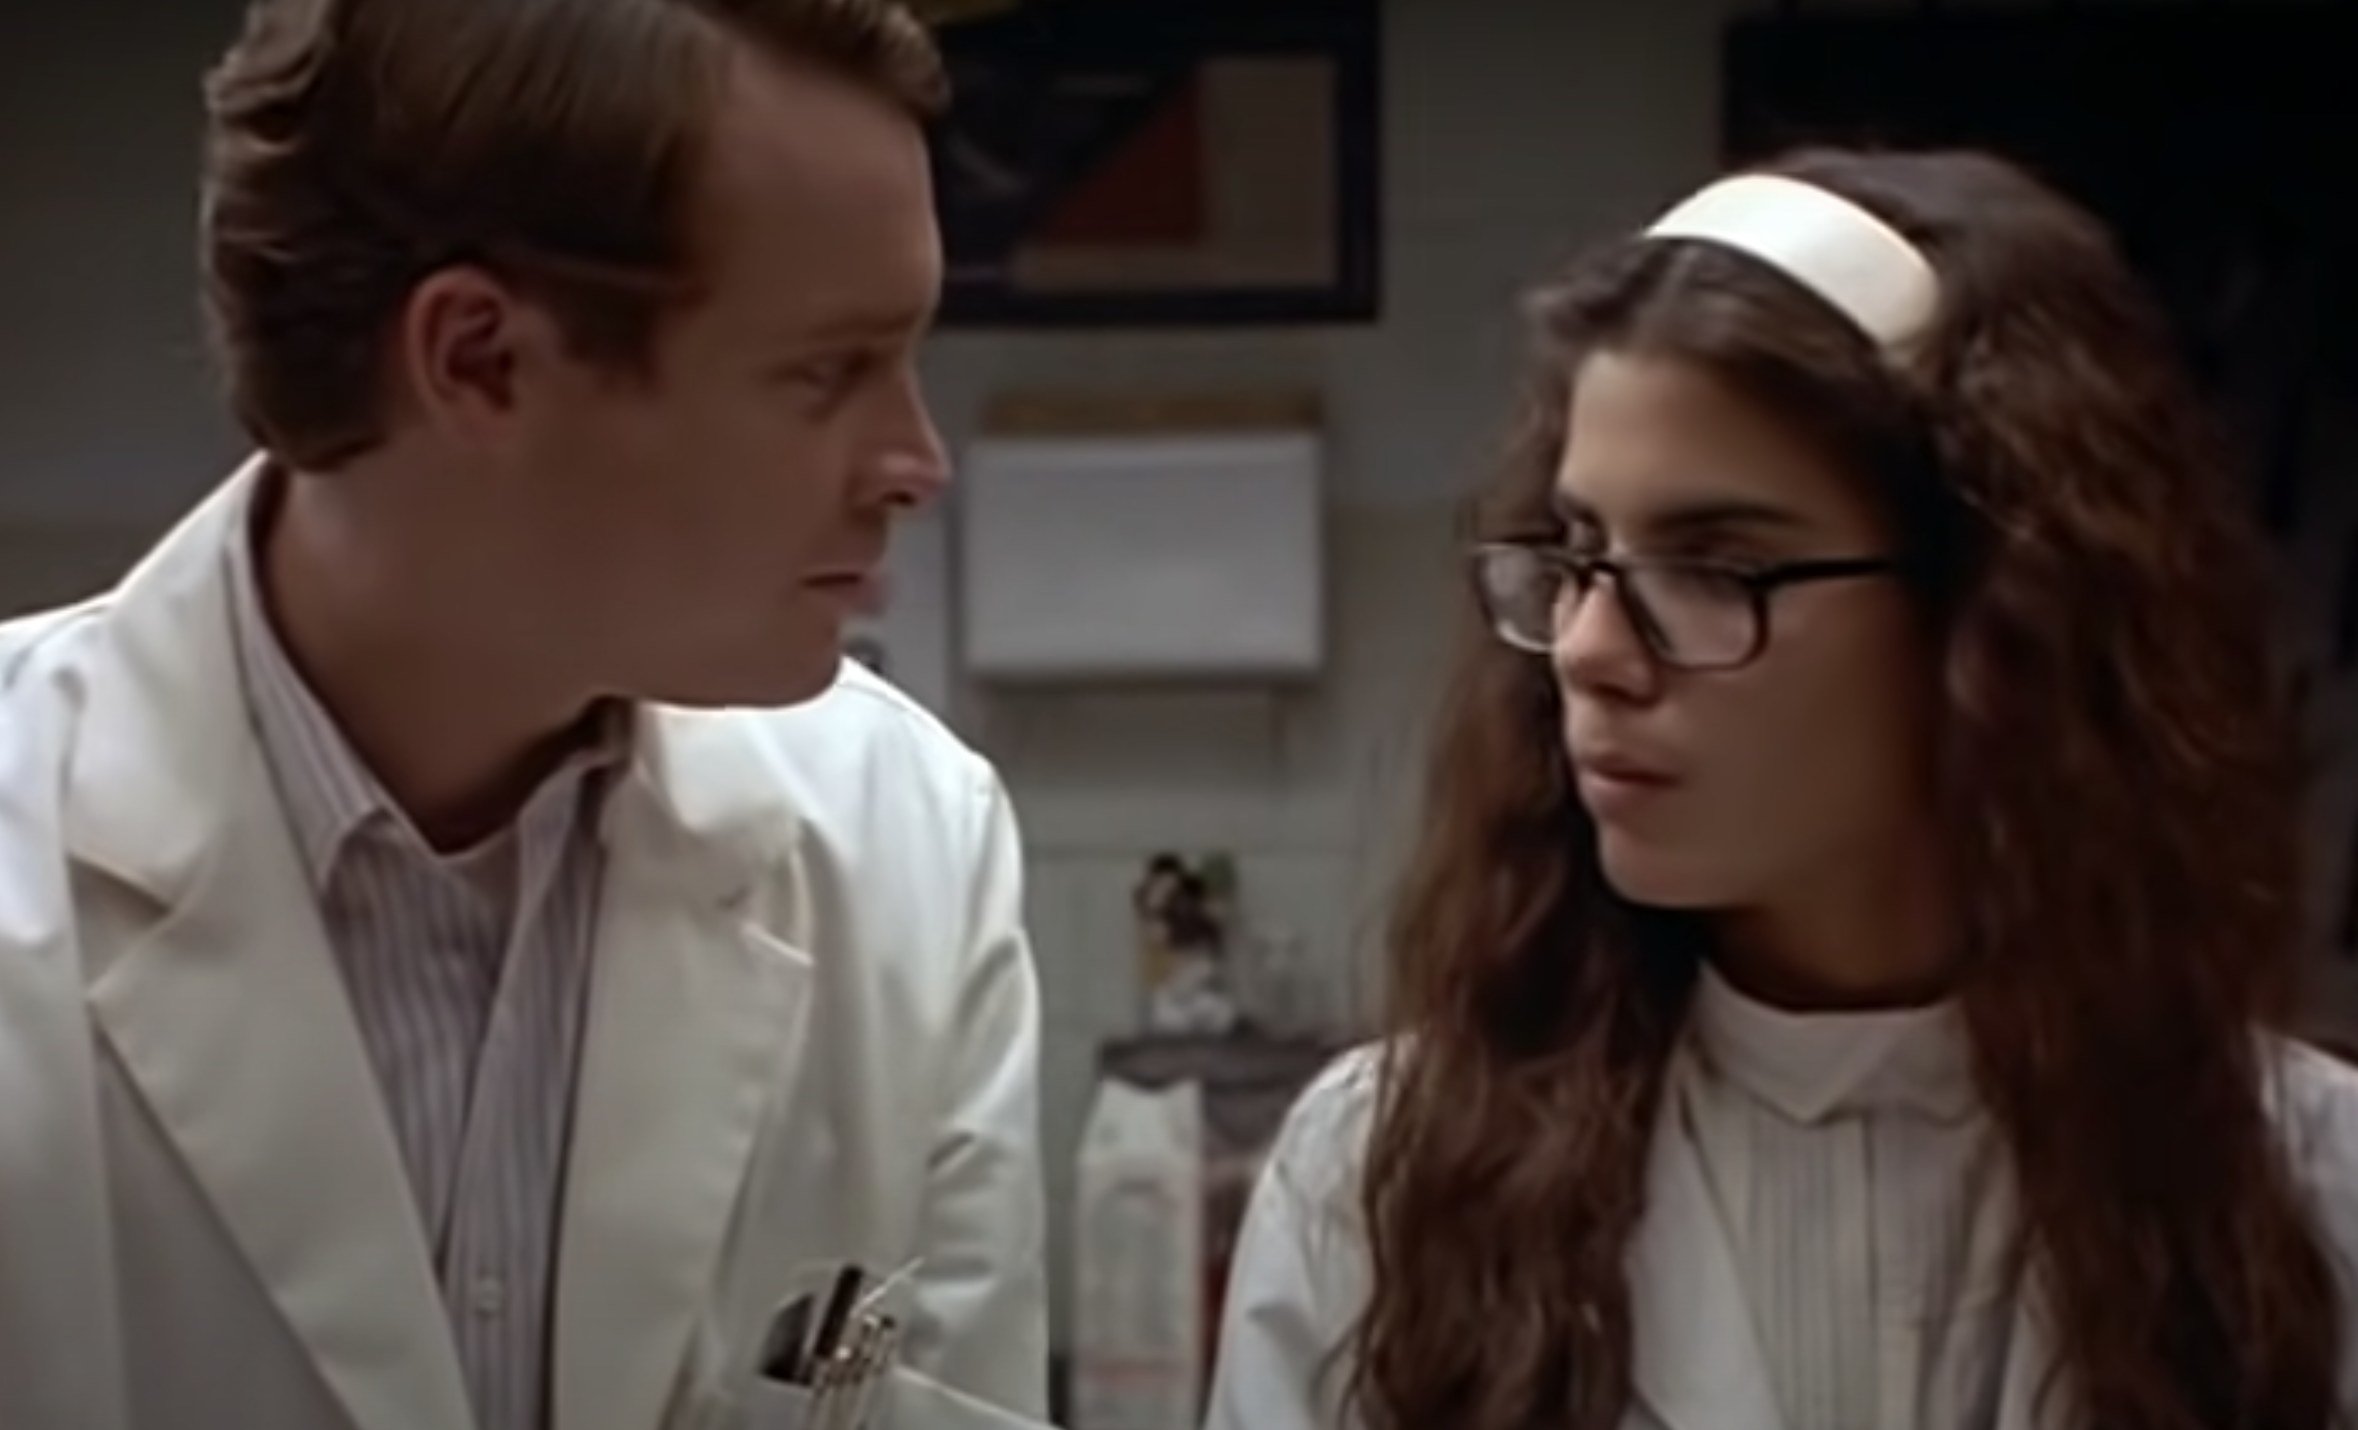 Actors Tate Donovan and  Sandra Bullock wear lab coats and look at each other as they speak.